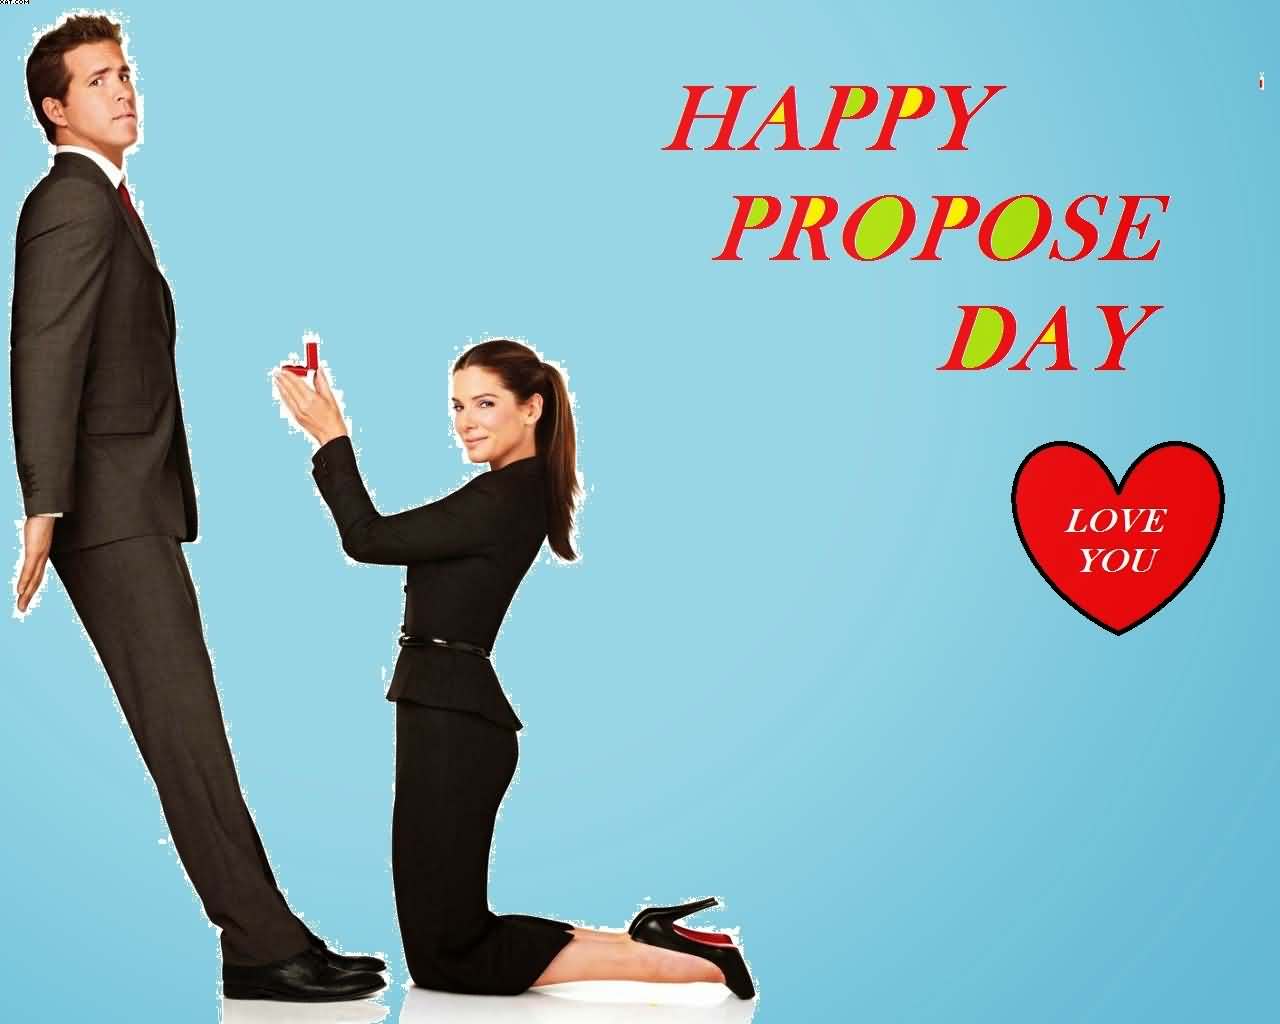 Happy Propose Day love you wallpaper